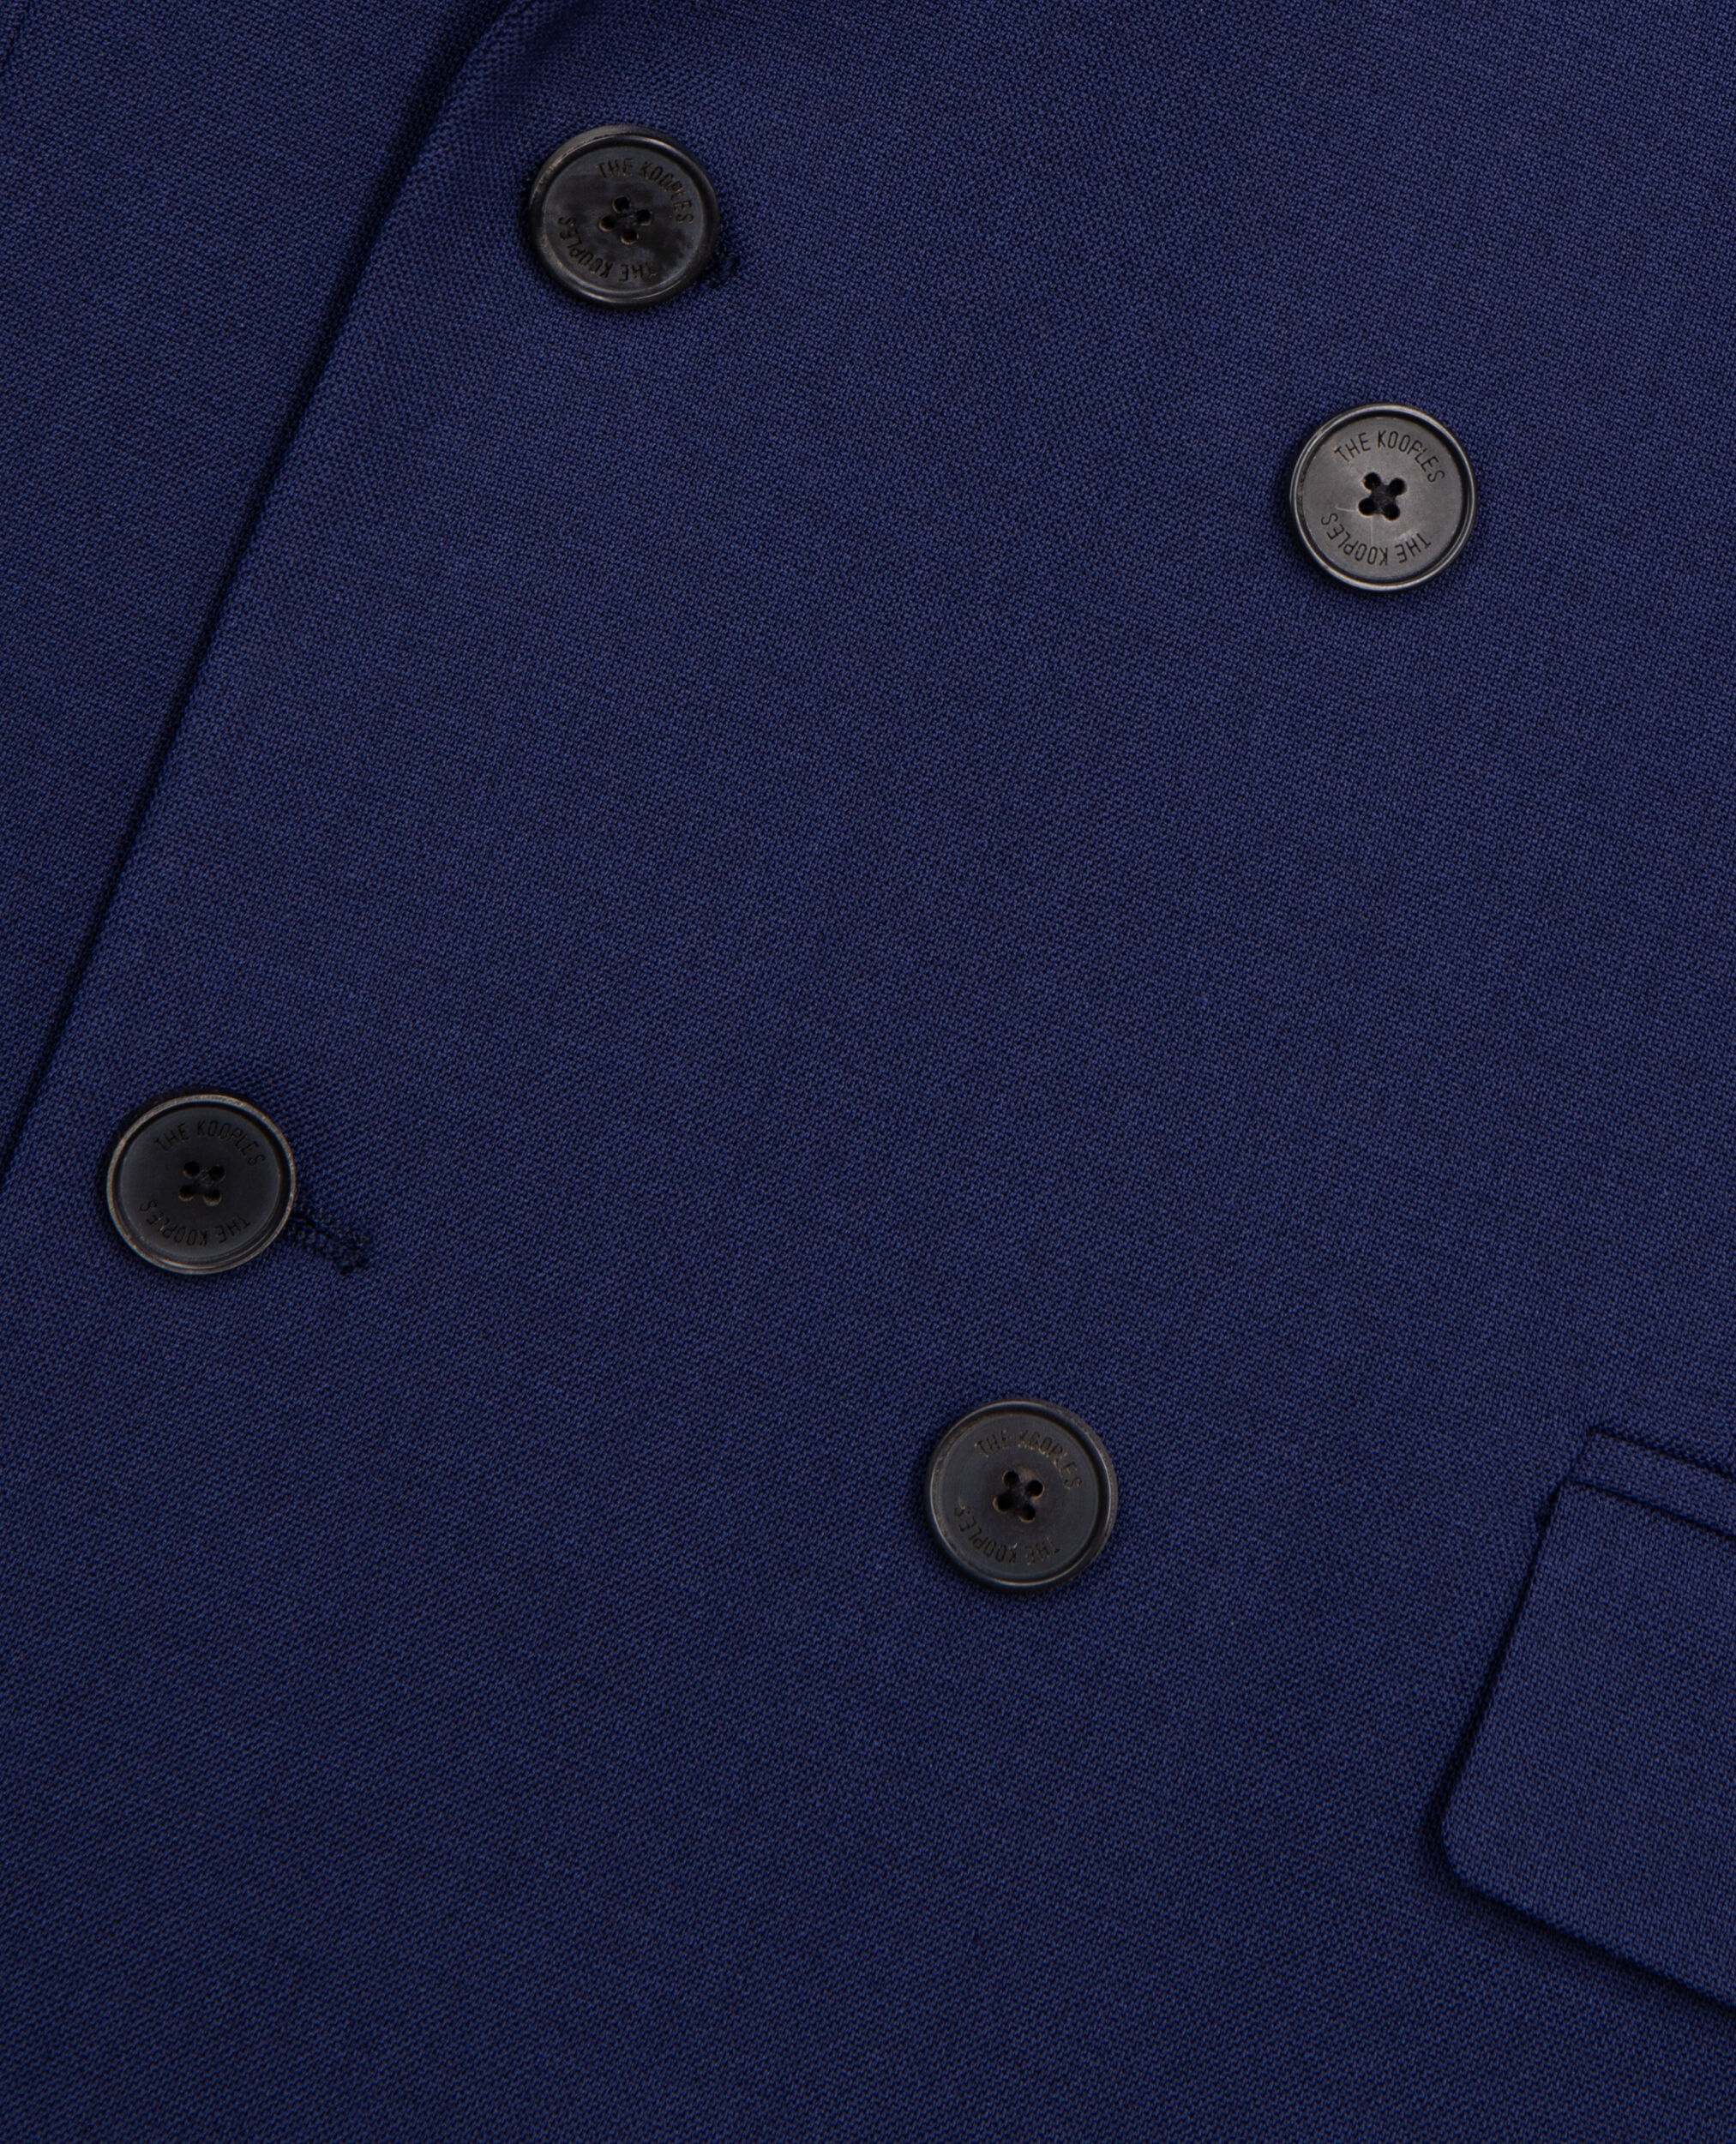 Bright blue wool double-breasted suit jacket, DARK BLUE, hi-res image number null